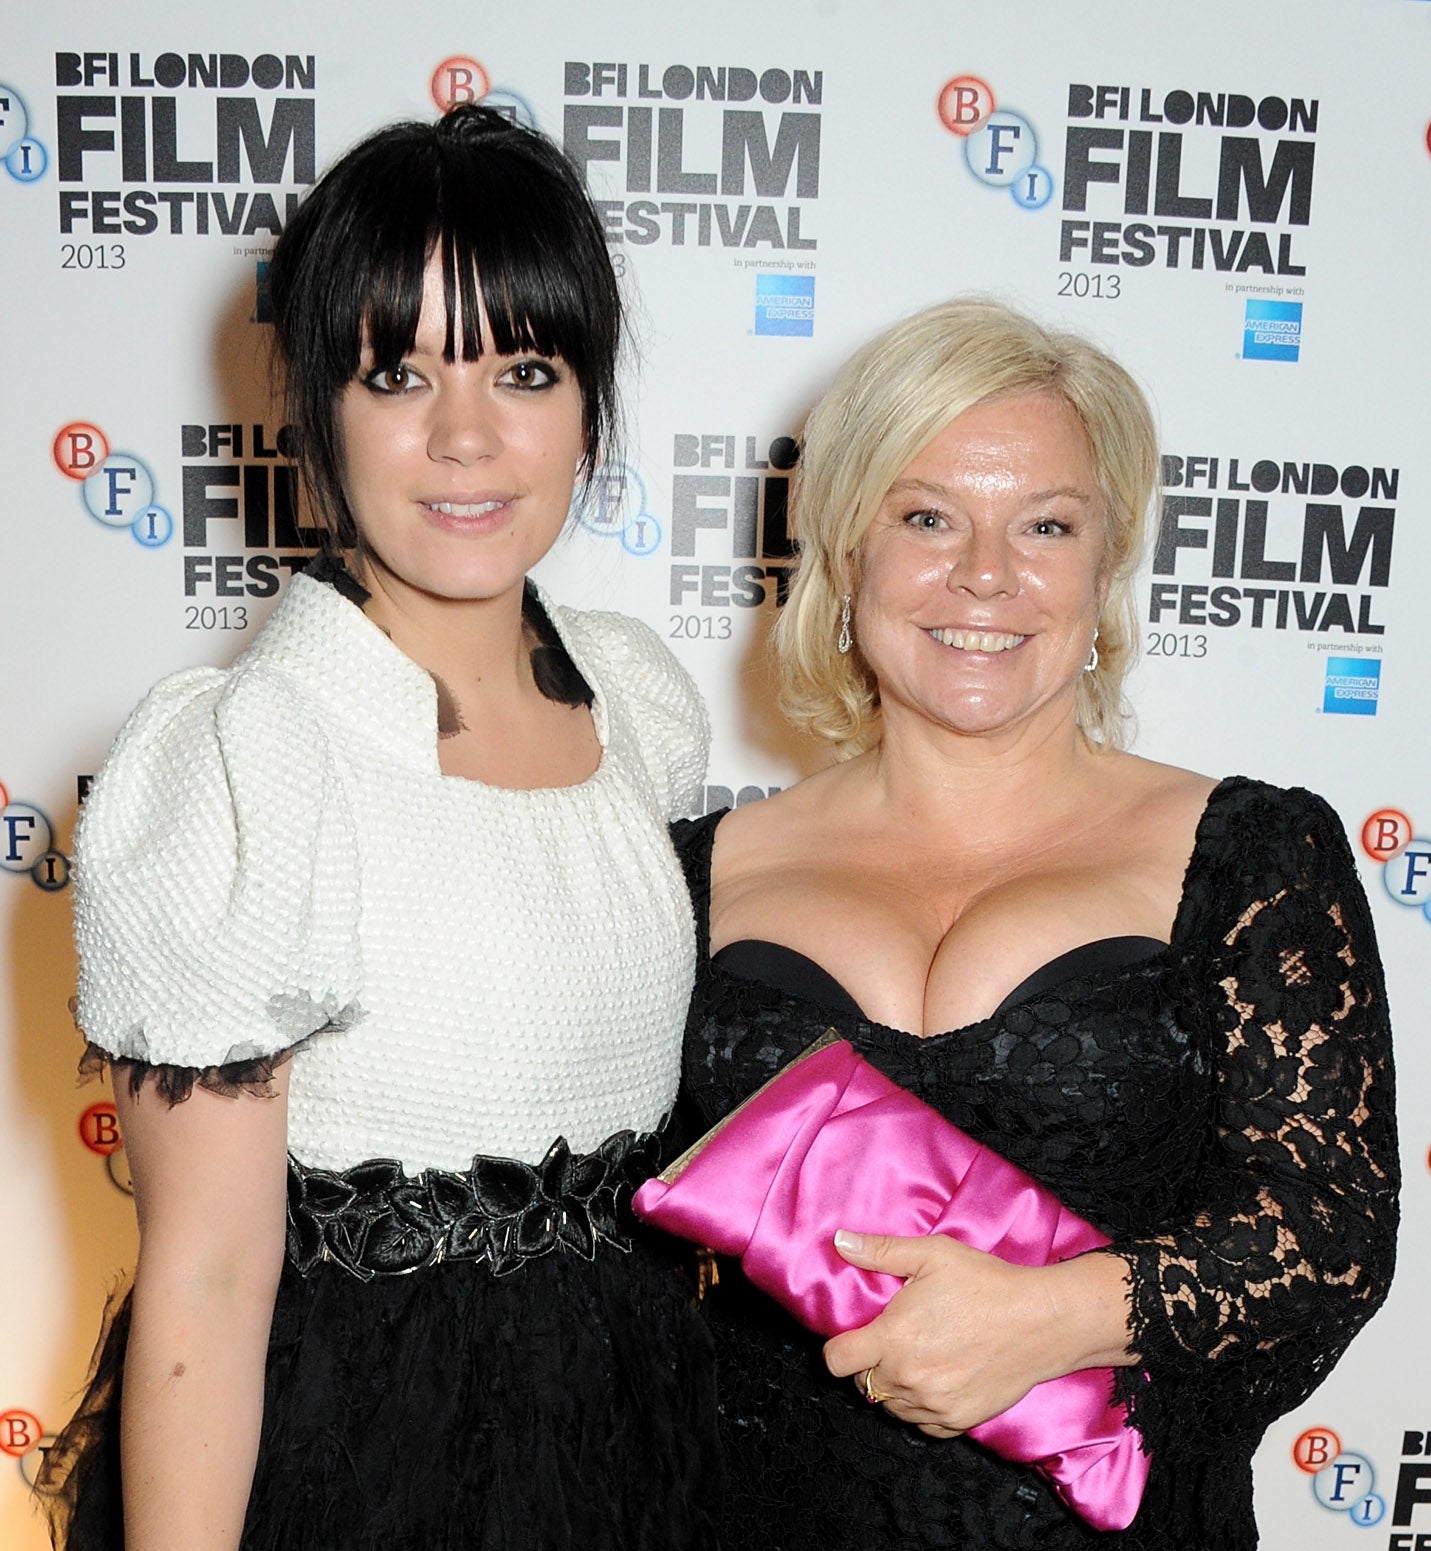 Lily Allen with her mom, Alison Owen on the red carpet